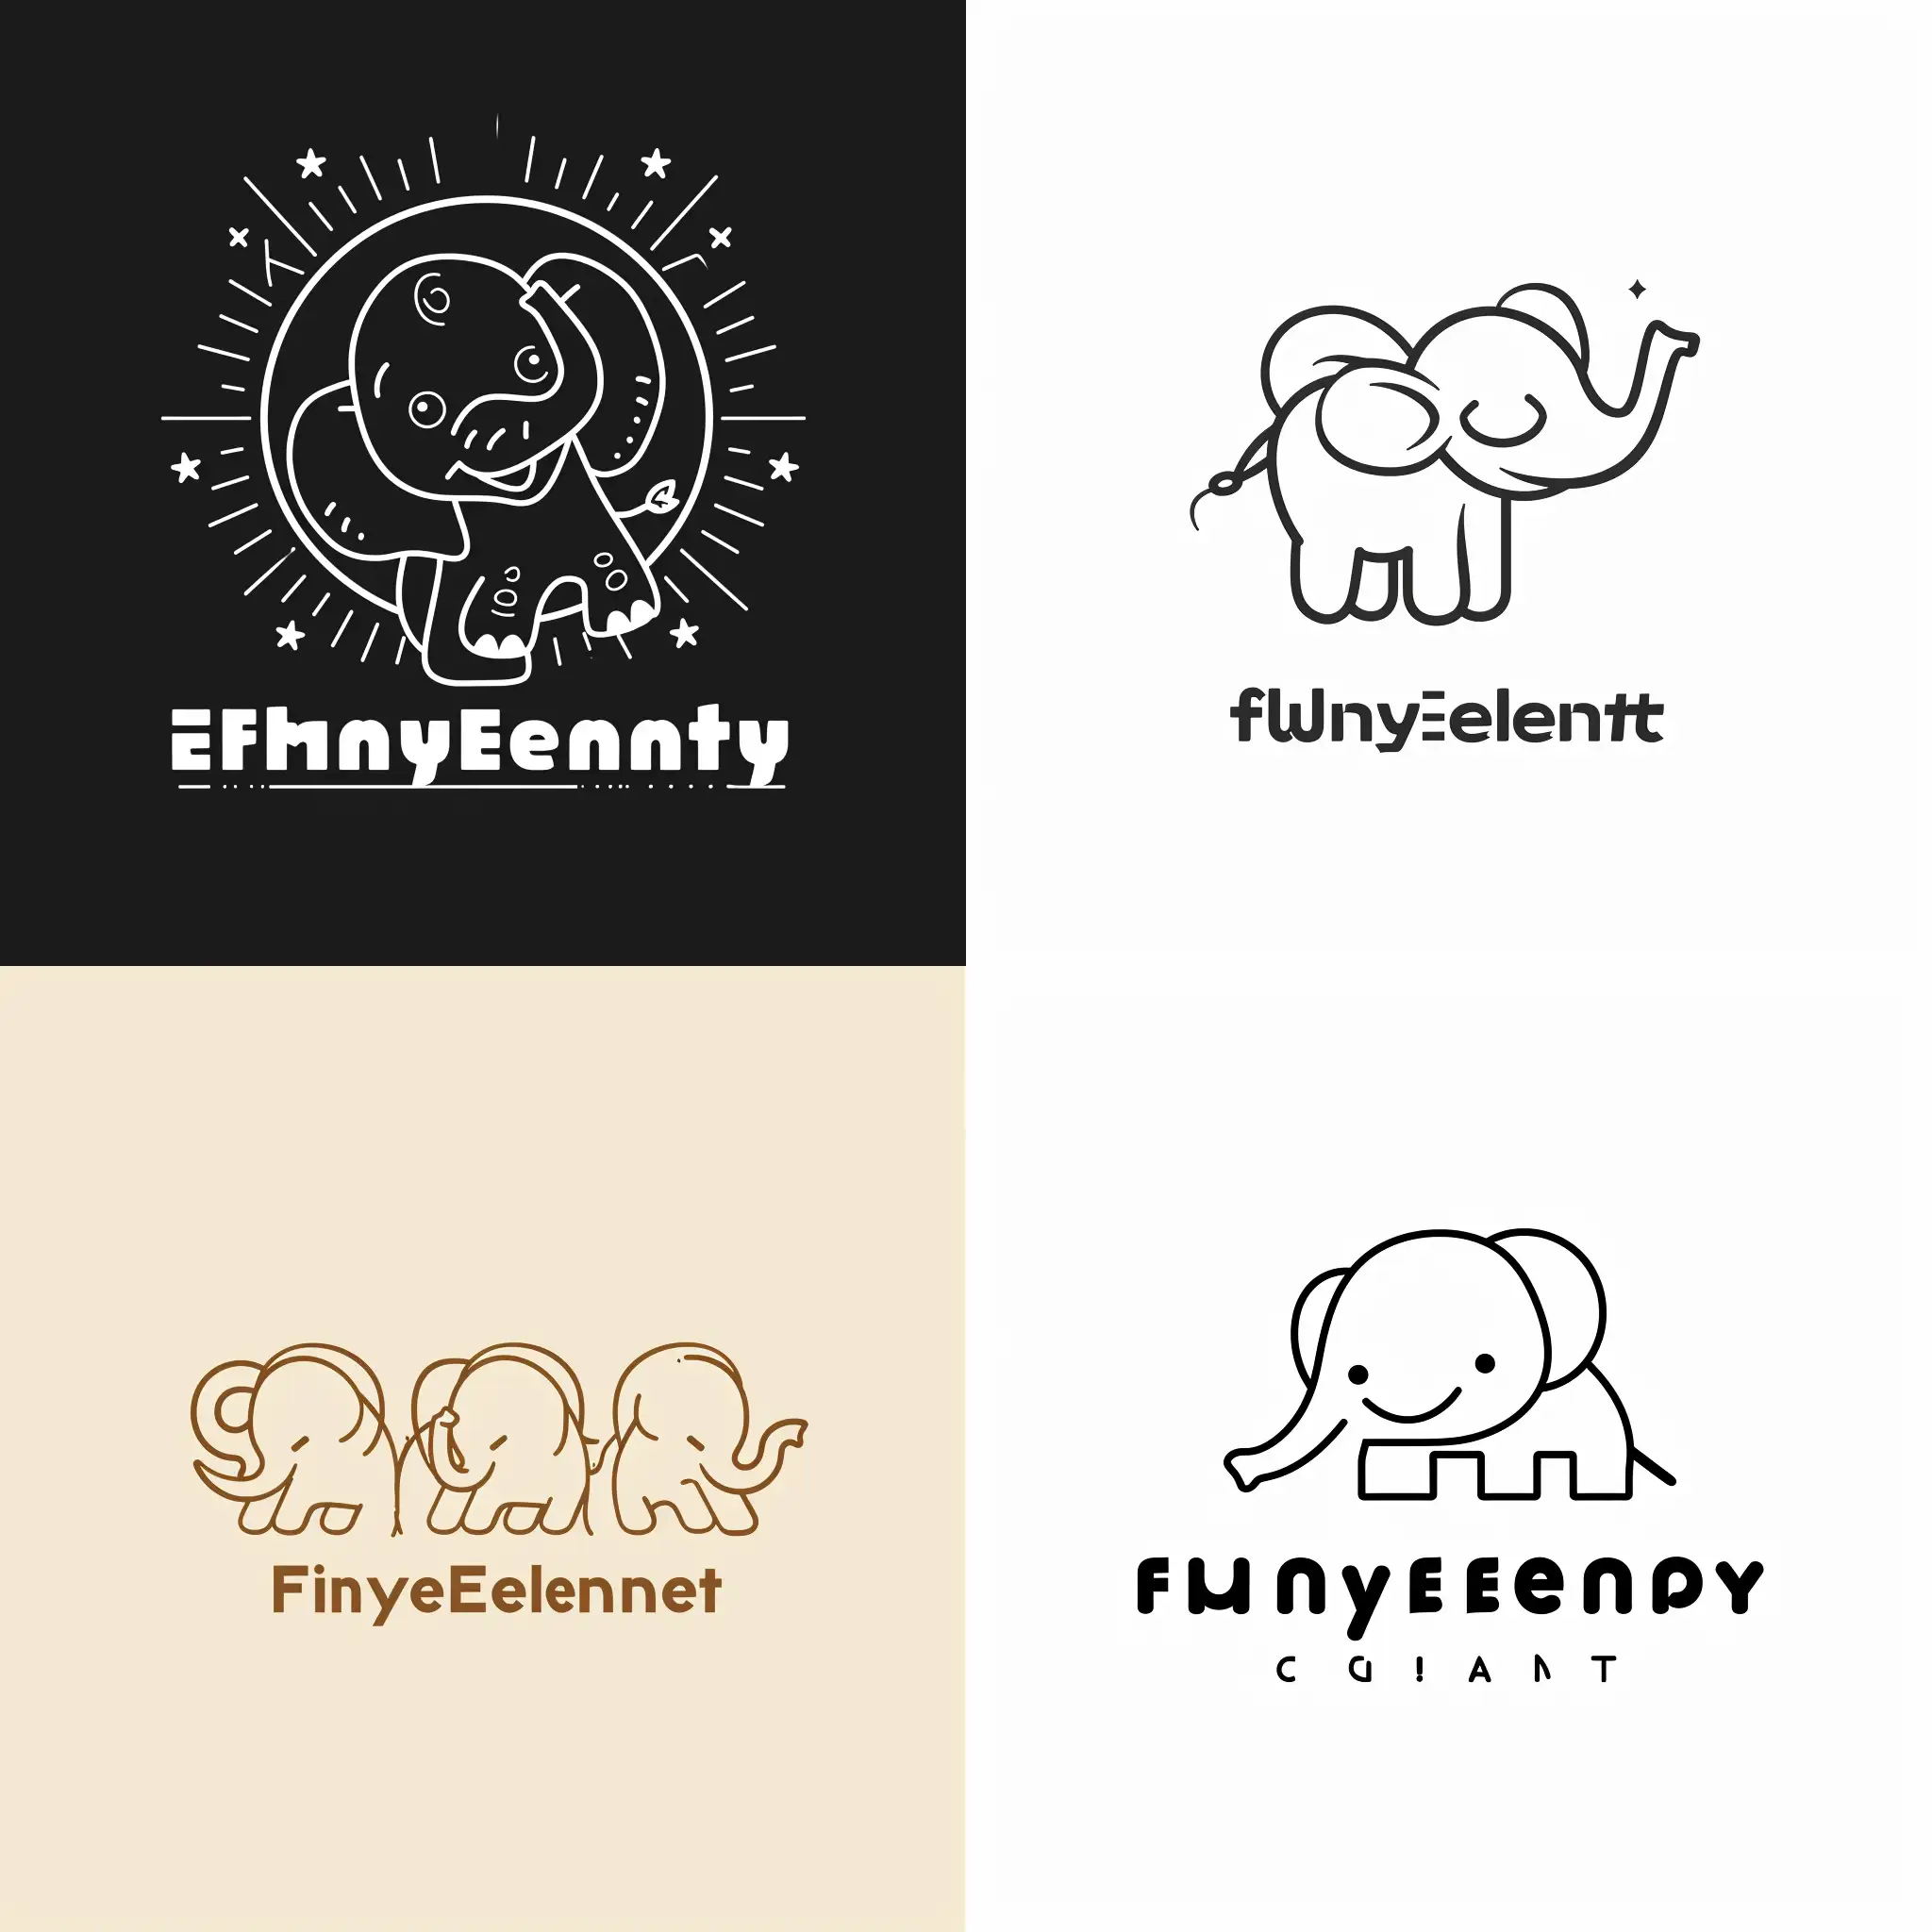 Charming-Logo-for-FunnyElephant-Band-with-Baby-Elephants-Travel-and-Warmth